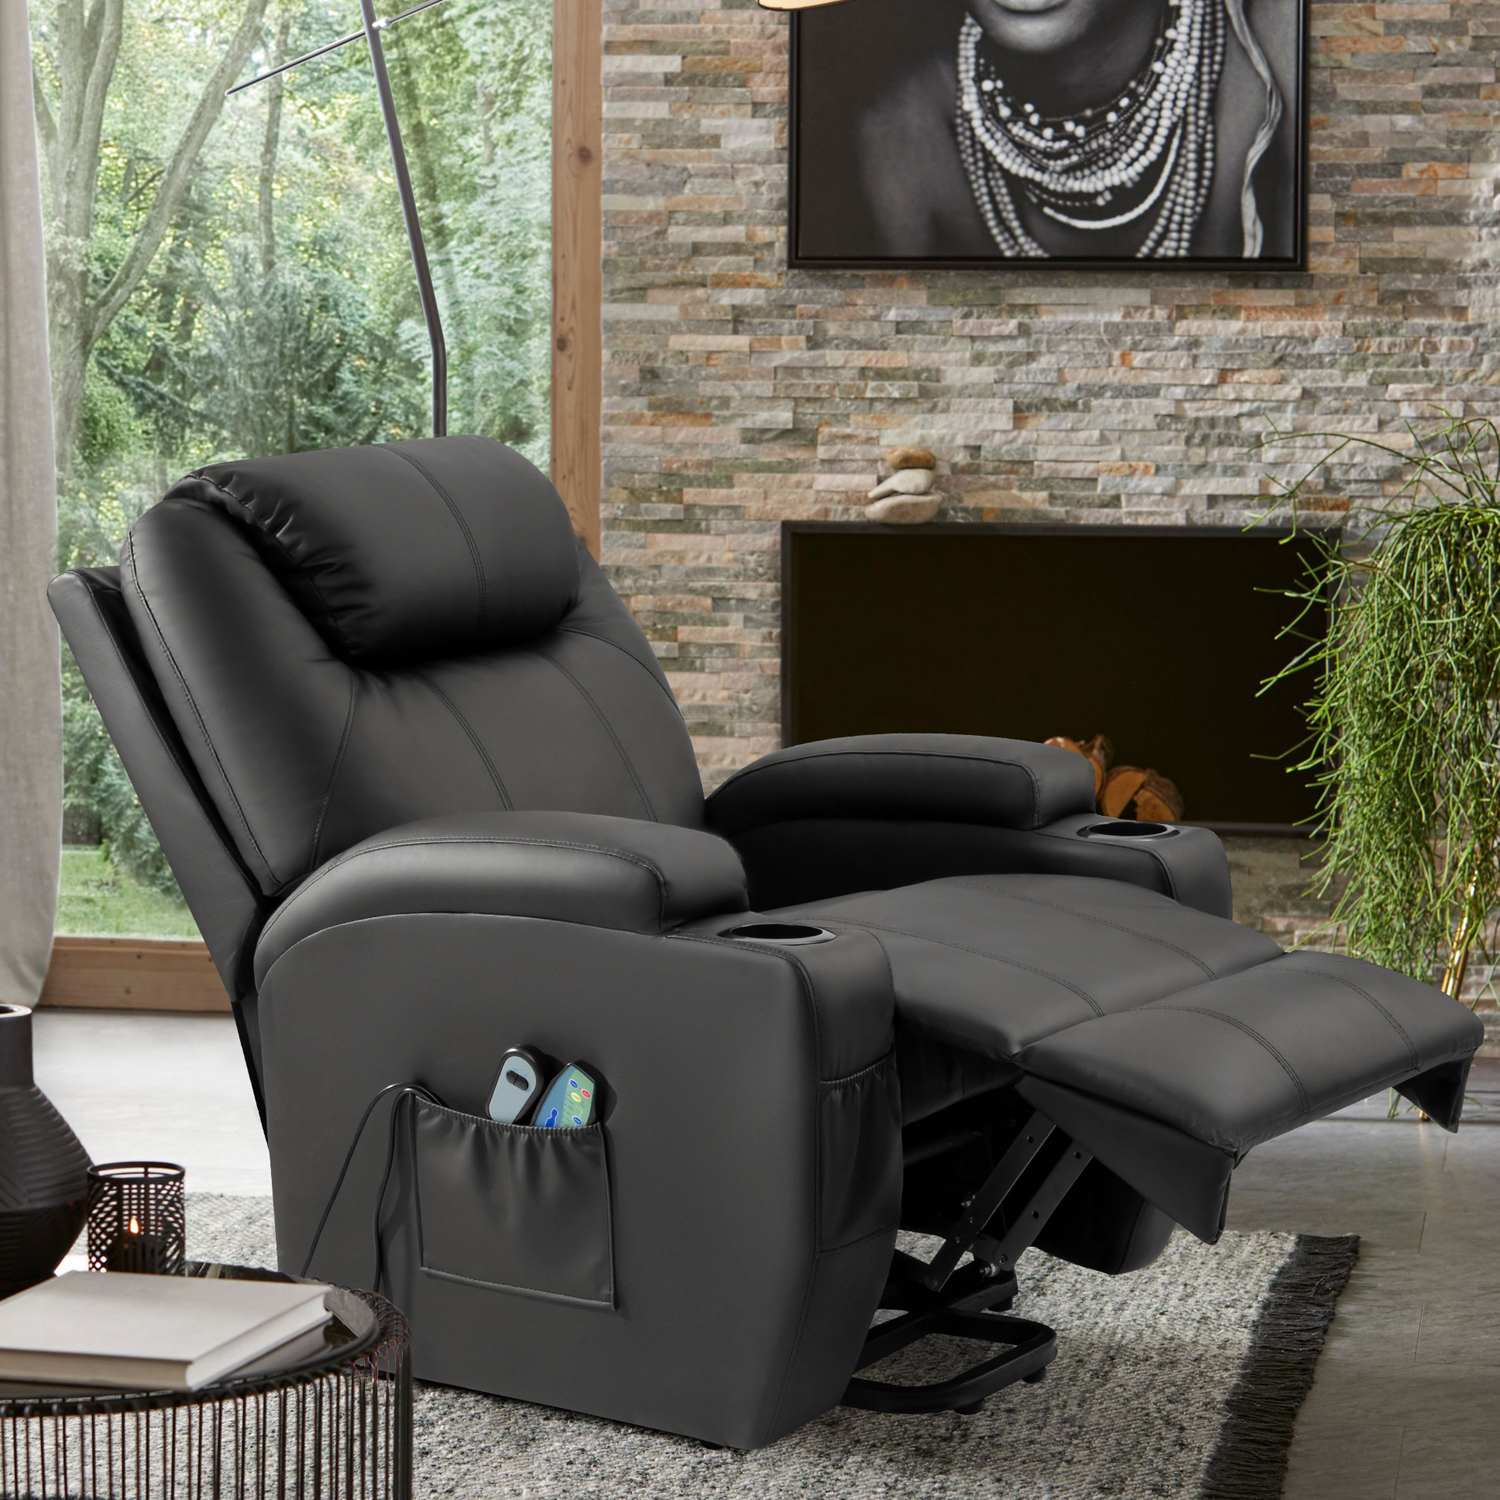 Lacoo Power Lift Recliner with Massage and Heat, Black Faux Leather - image 4 of 8